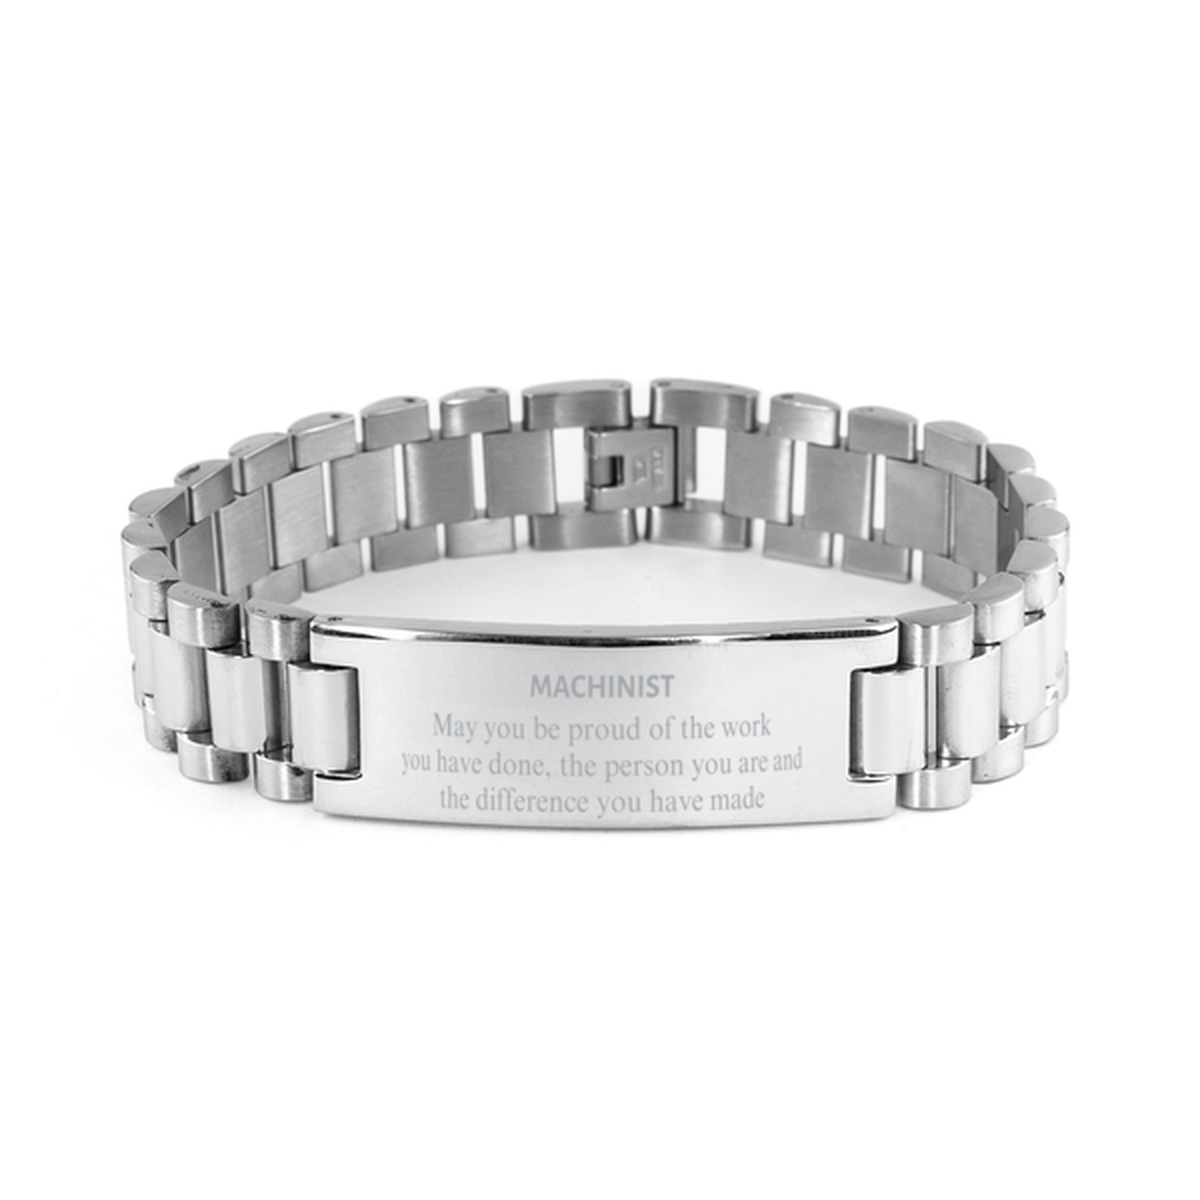 Machinist May you be proud of the work you have done, Retirement Machinist Ladder Stainless Steel Bracelet for Colleague Appreciation Gifts Amazing for Machinist